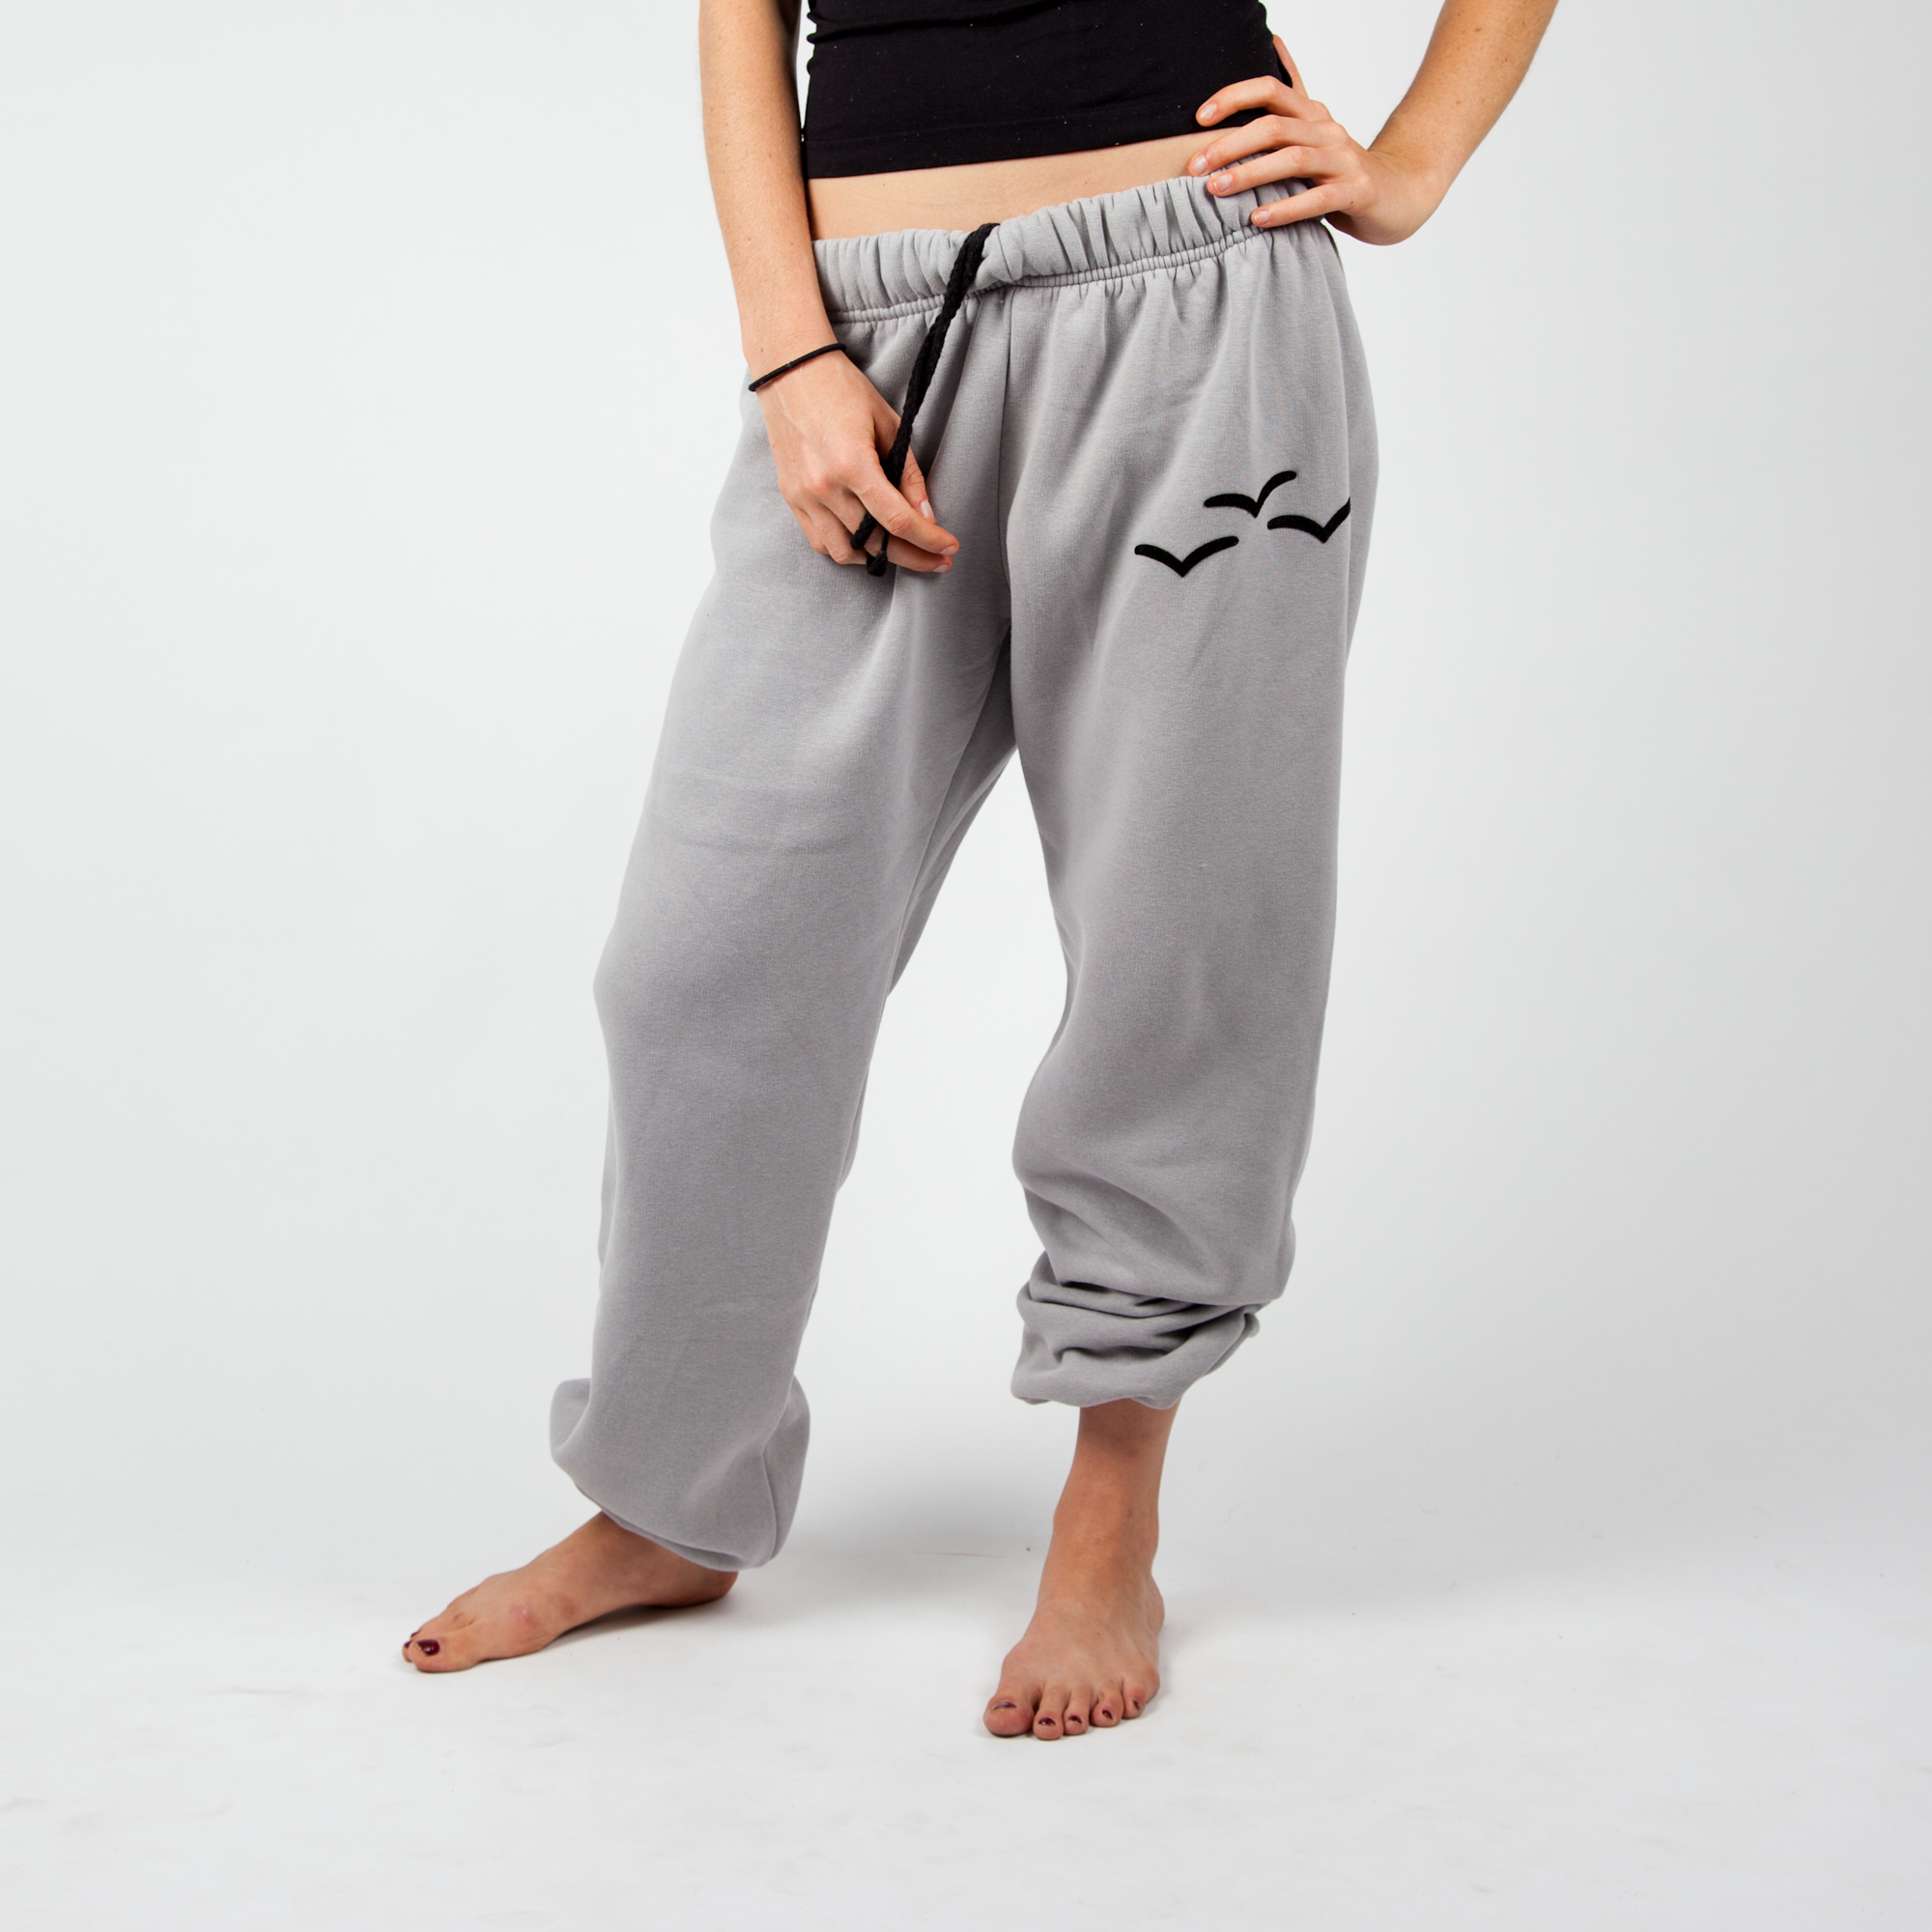 Lazypants; Coziest Sweat Pants Made in Canada - Life's a Blog